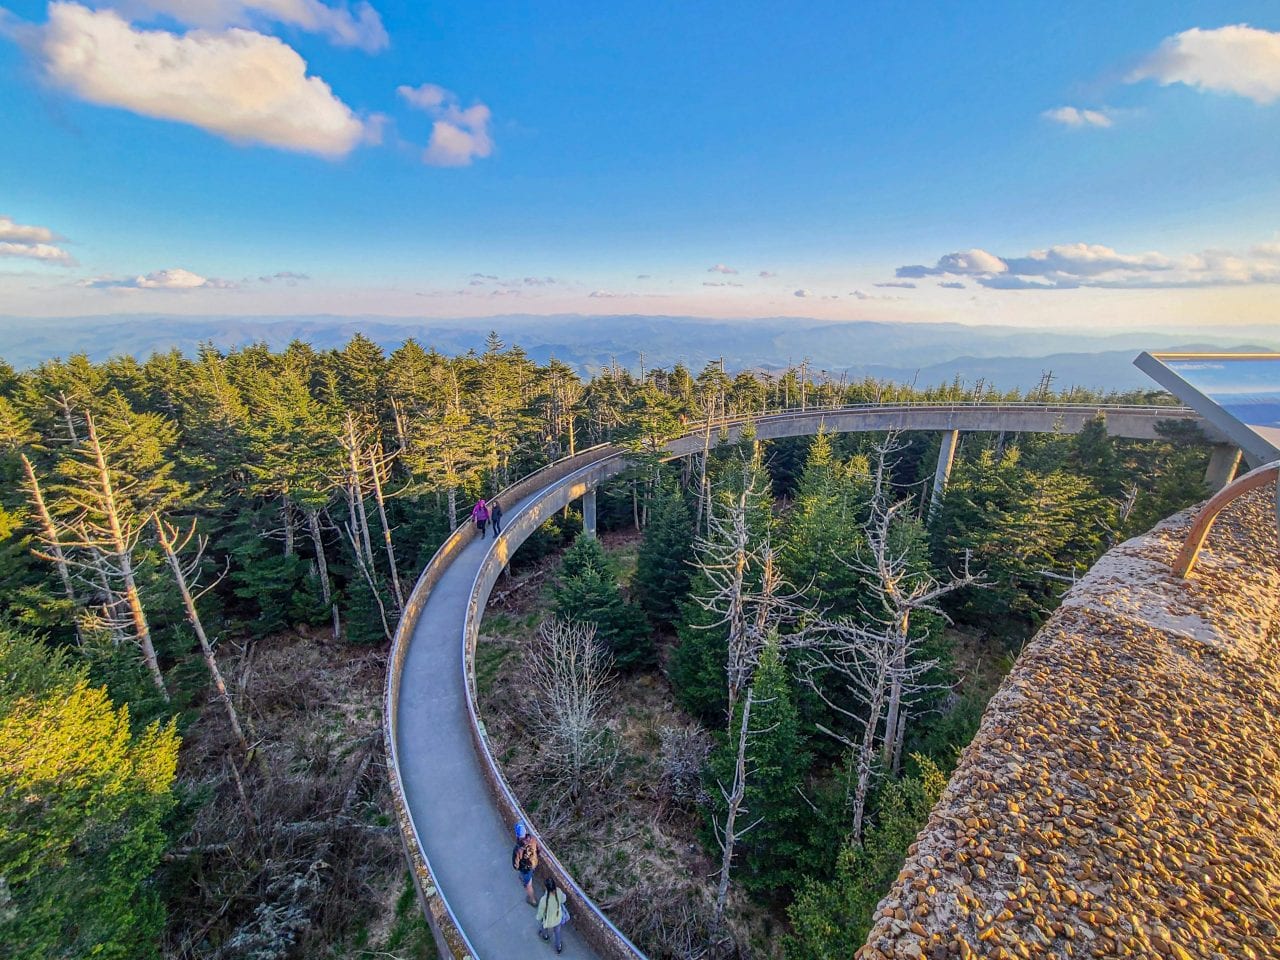 View from the Clingmans Dome observation tower